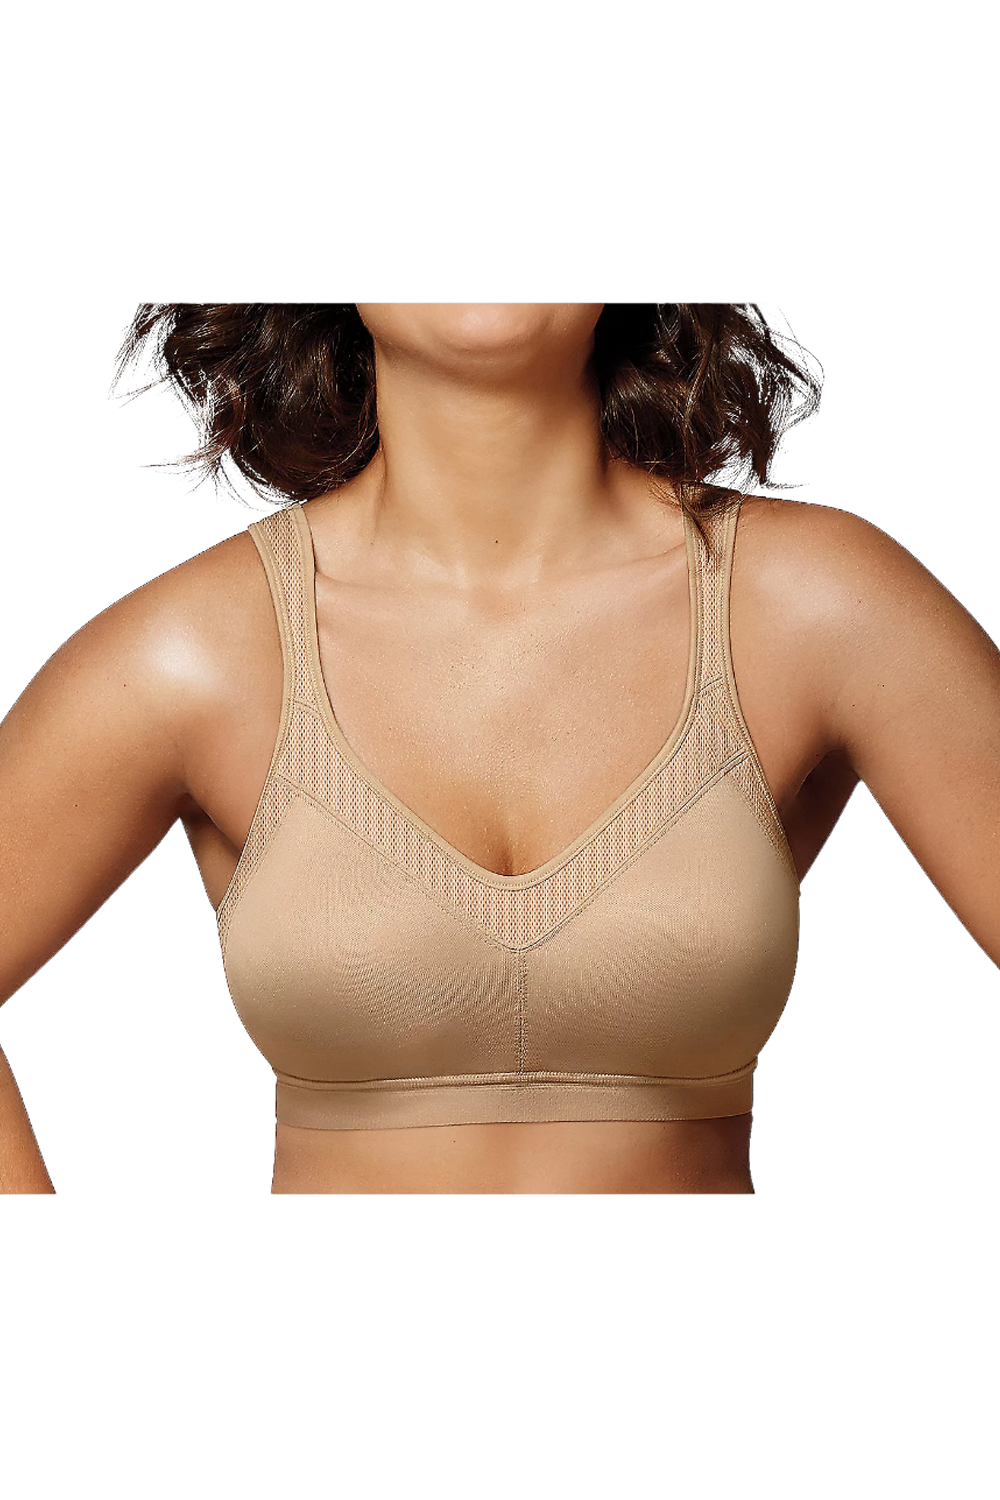 Playtex 18 Hour Active Breathable Comfort Wireless Bra Nude